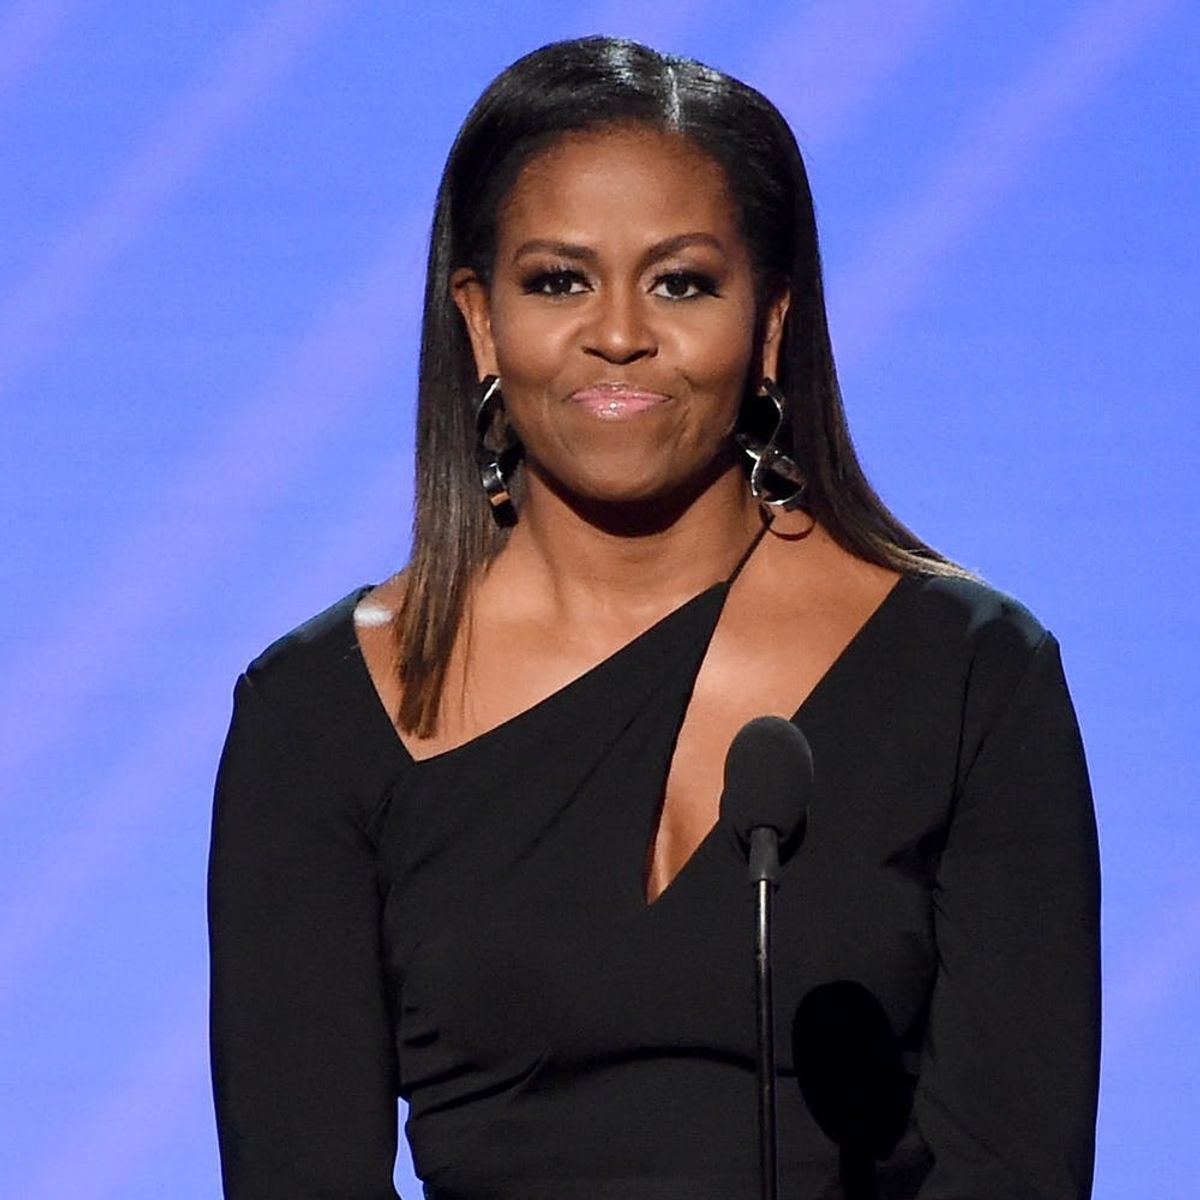 Michelle Obama Debuted a Whole New (Sexier) Look at the ESPYs 2017